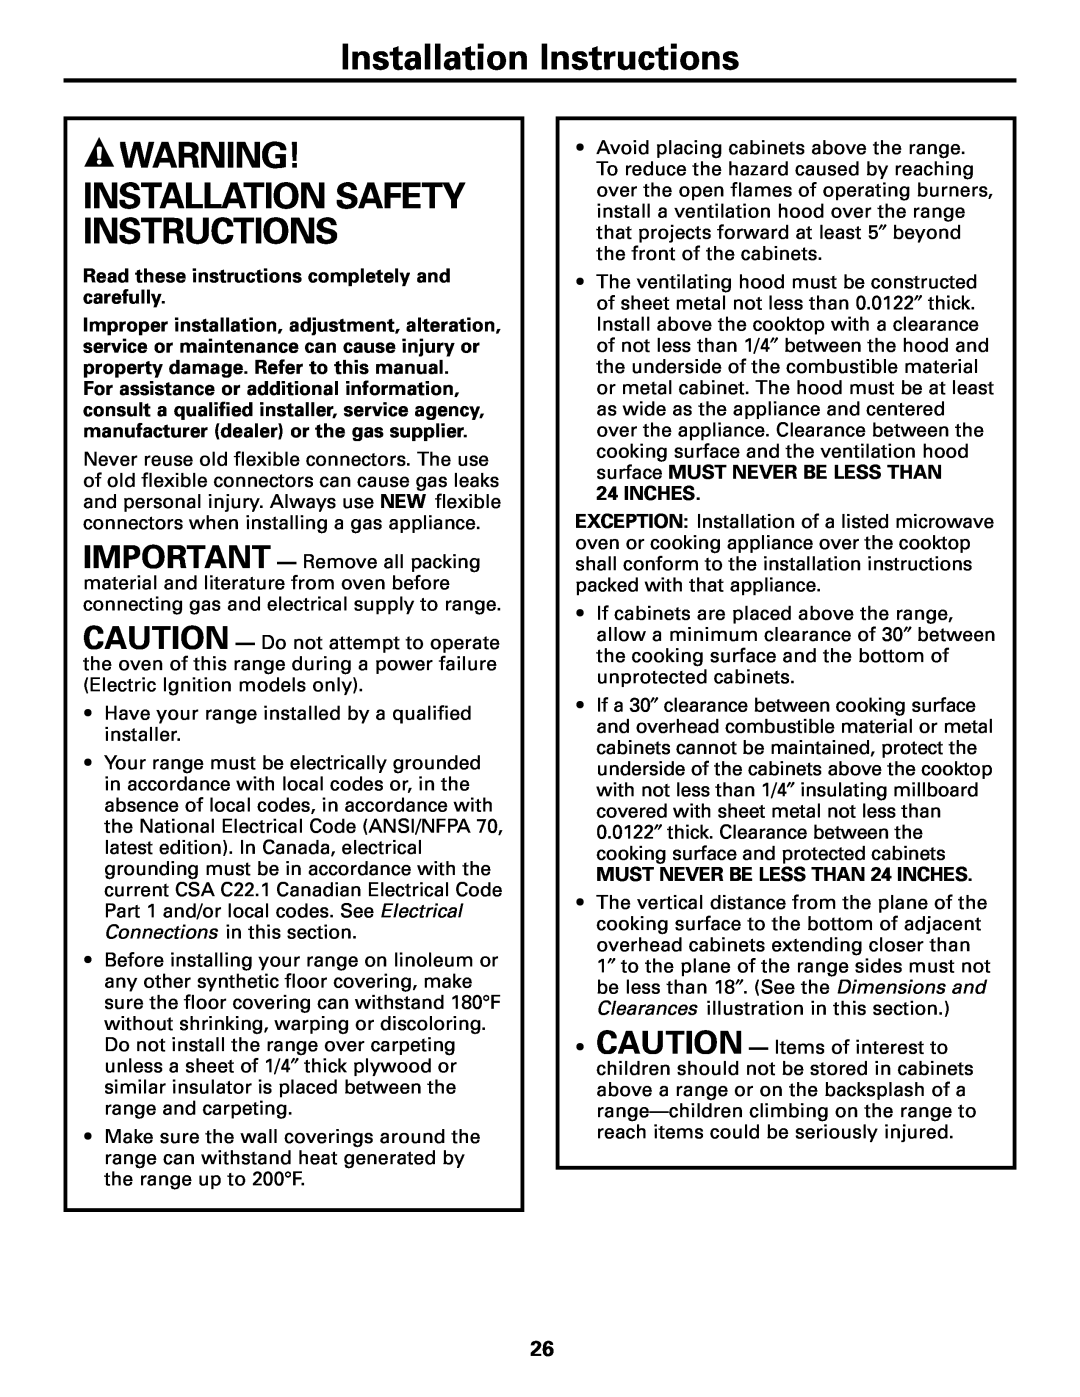 GE JGSS05 Installation Instructions, Installation Safety Instructions, Read these instructions completely and carefully 